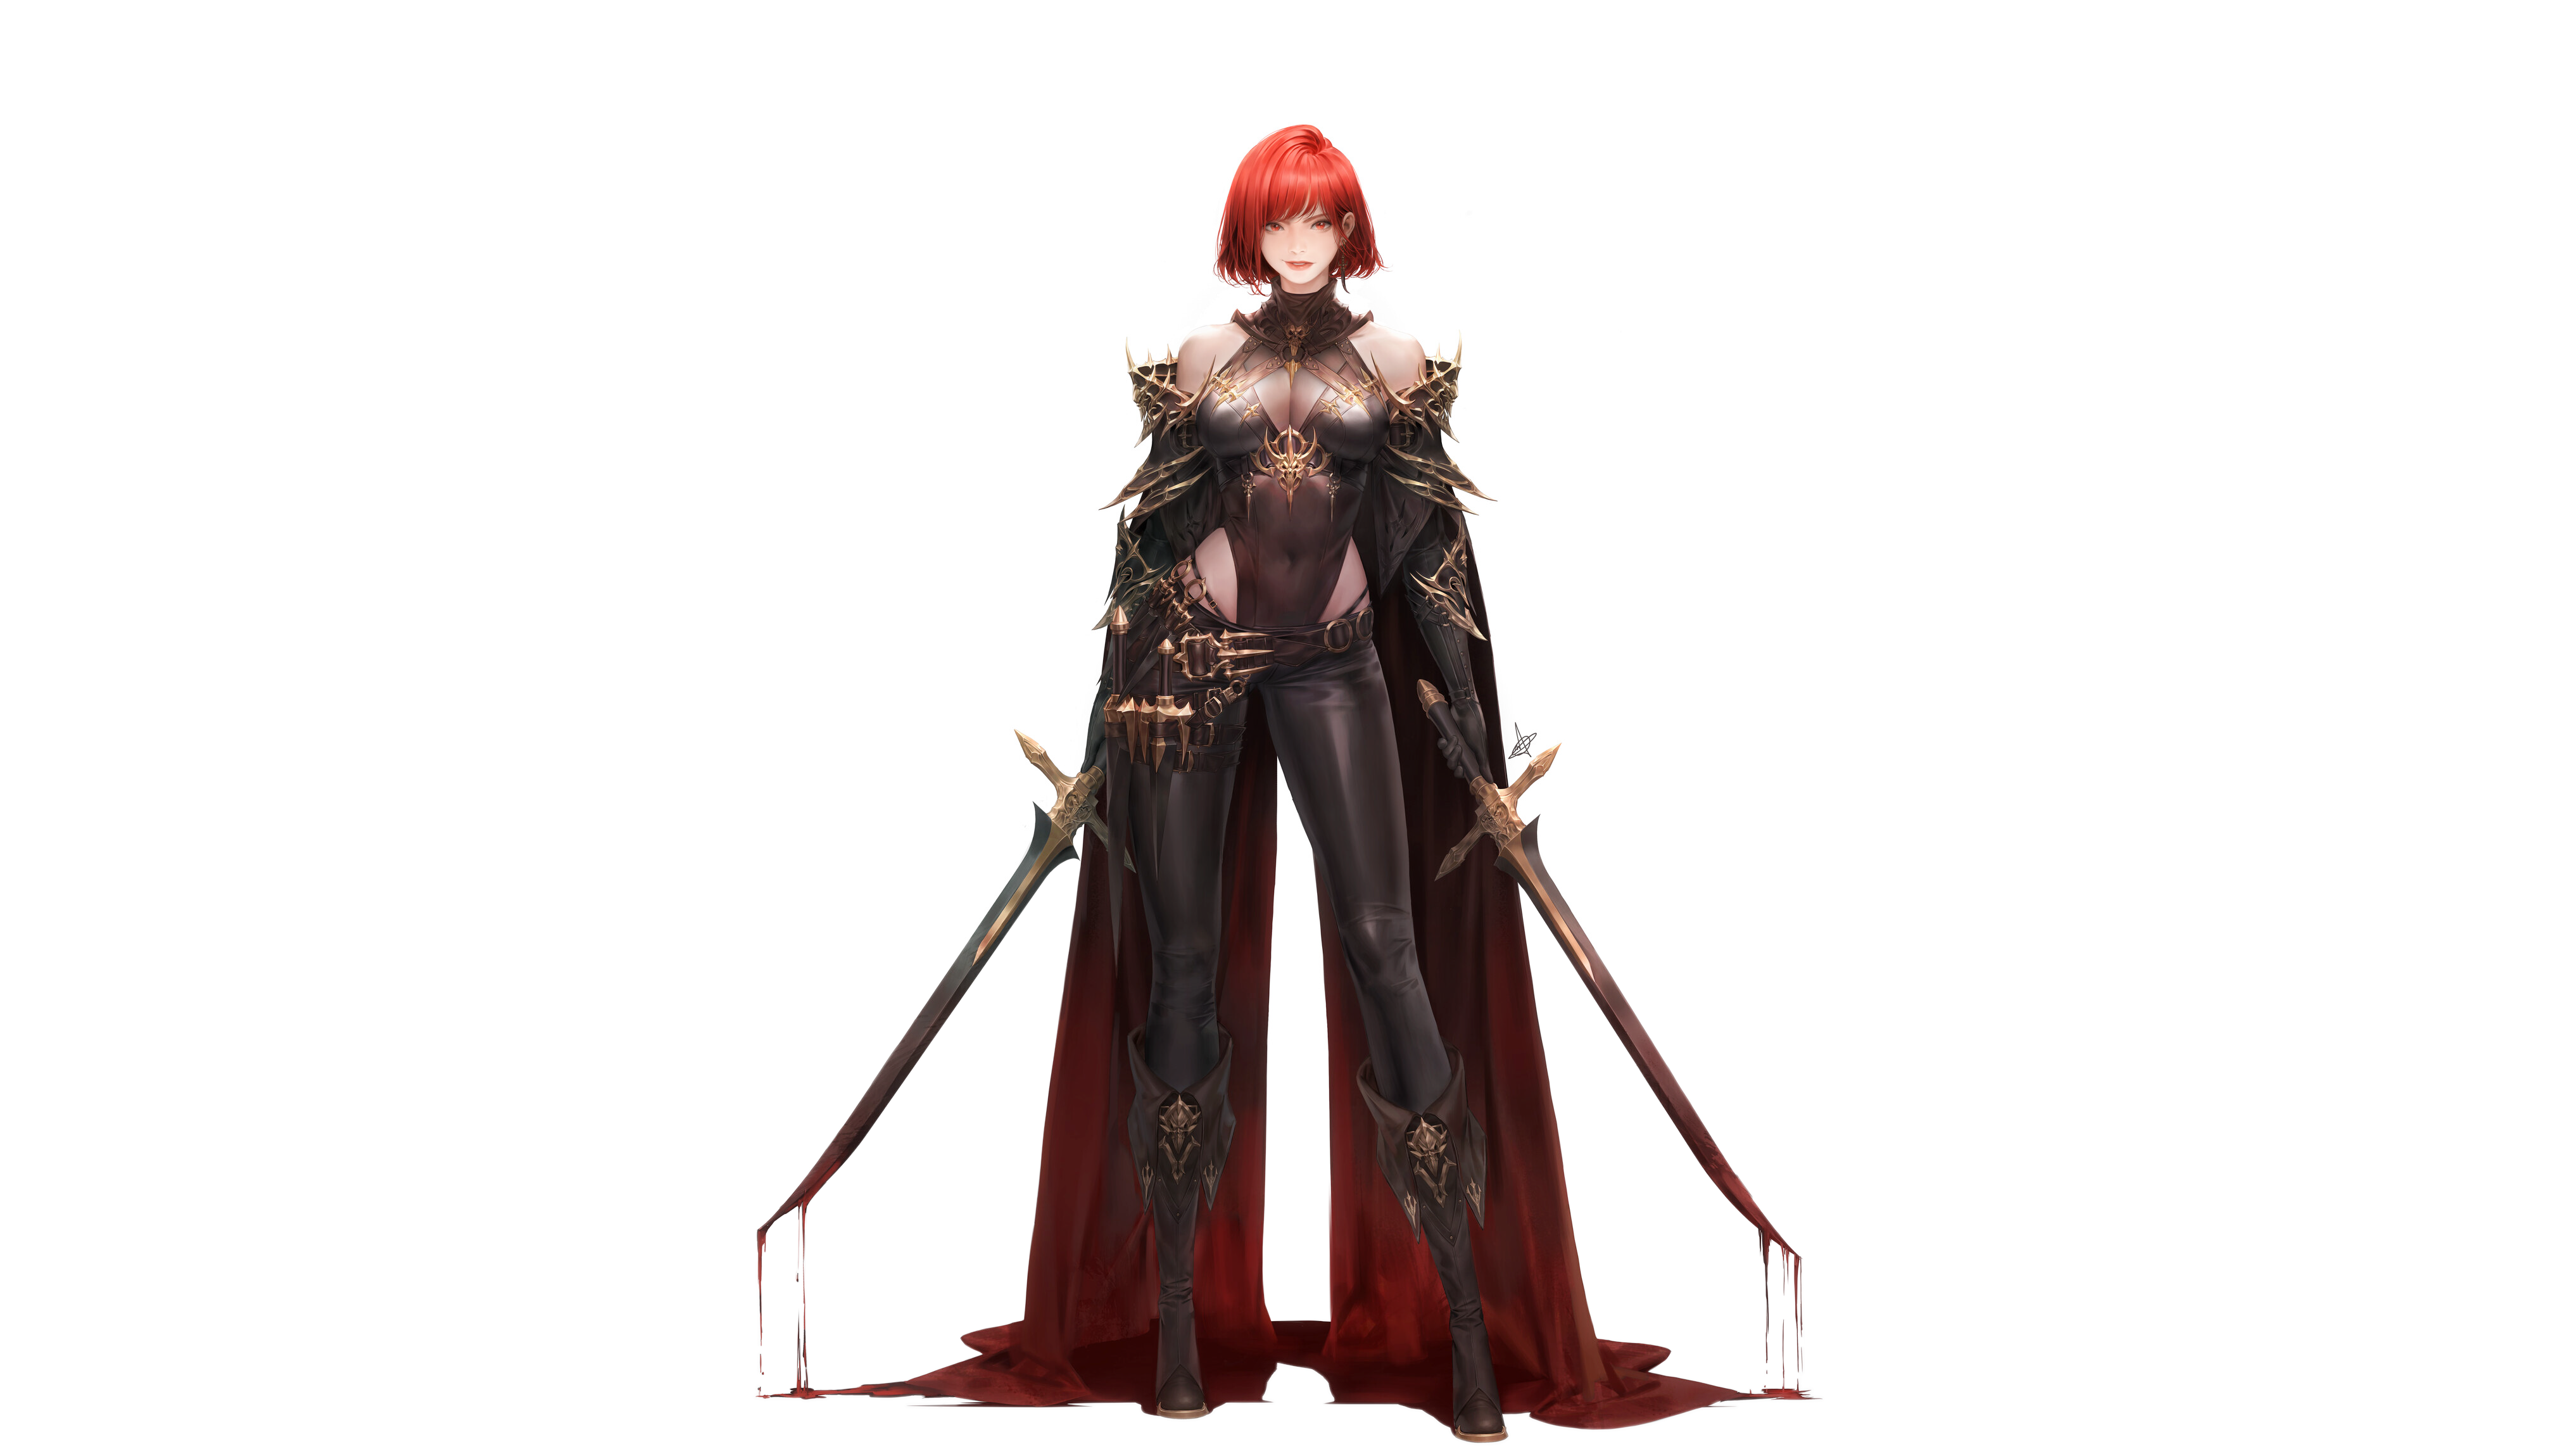 General 4068x2288 video games video game characters video game art armor blood leotard short hair redhead red eyes original characters women with swords sword standing smiling white background cleavage